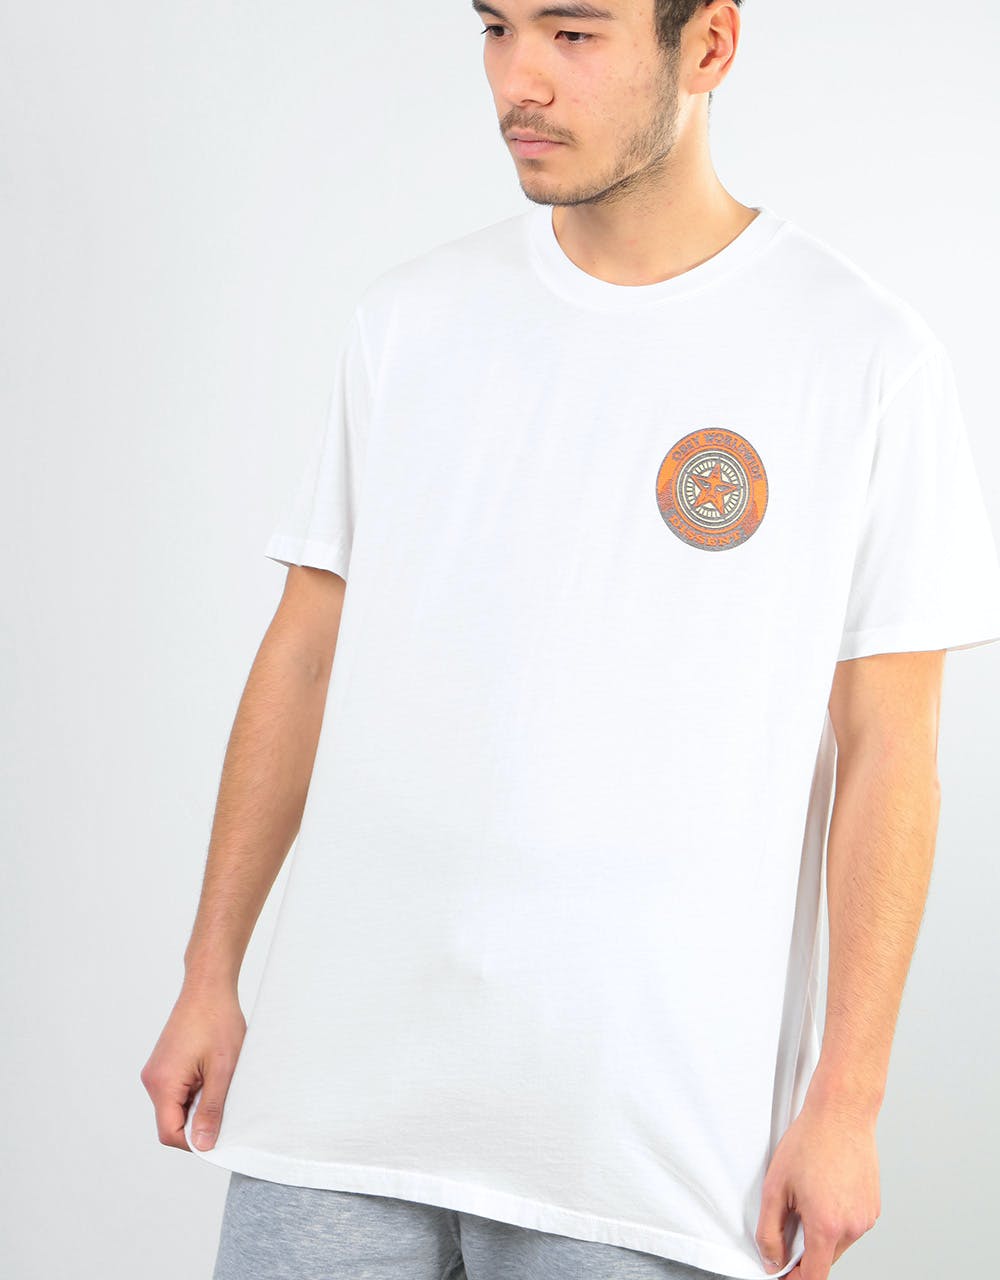 Obey Obey Dissent T-Shirt - White